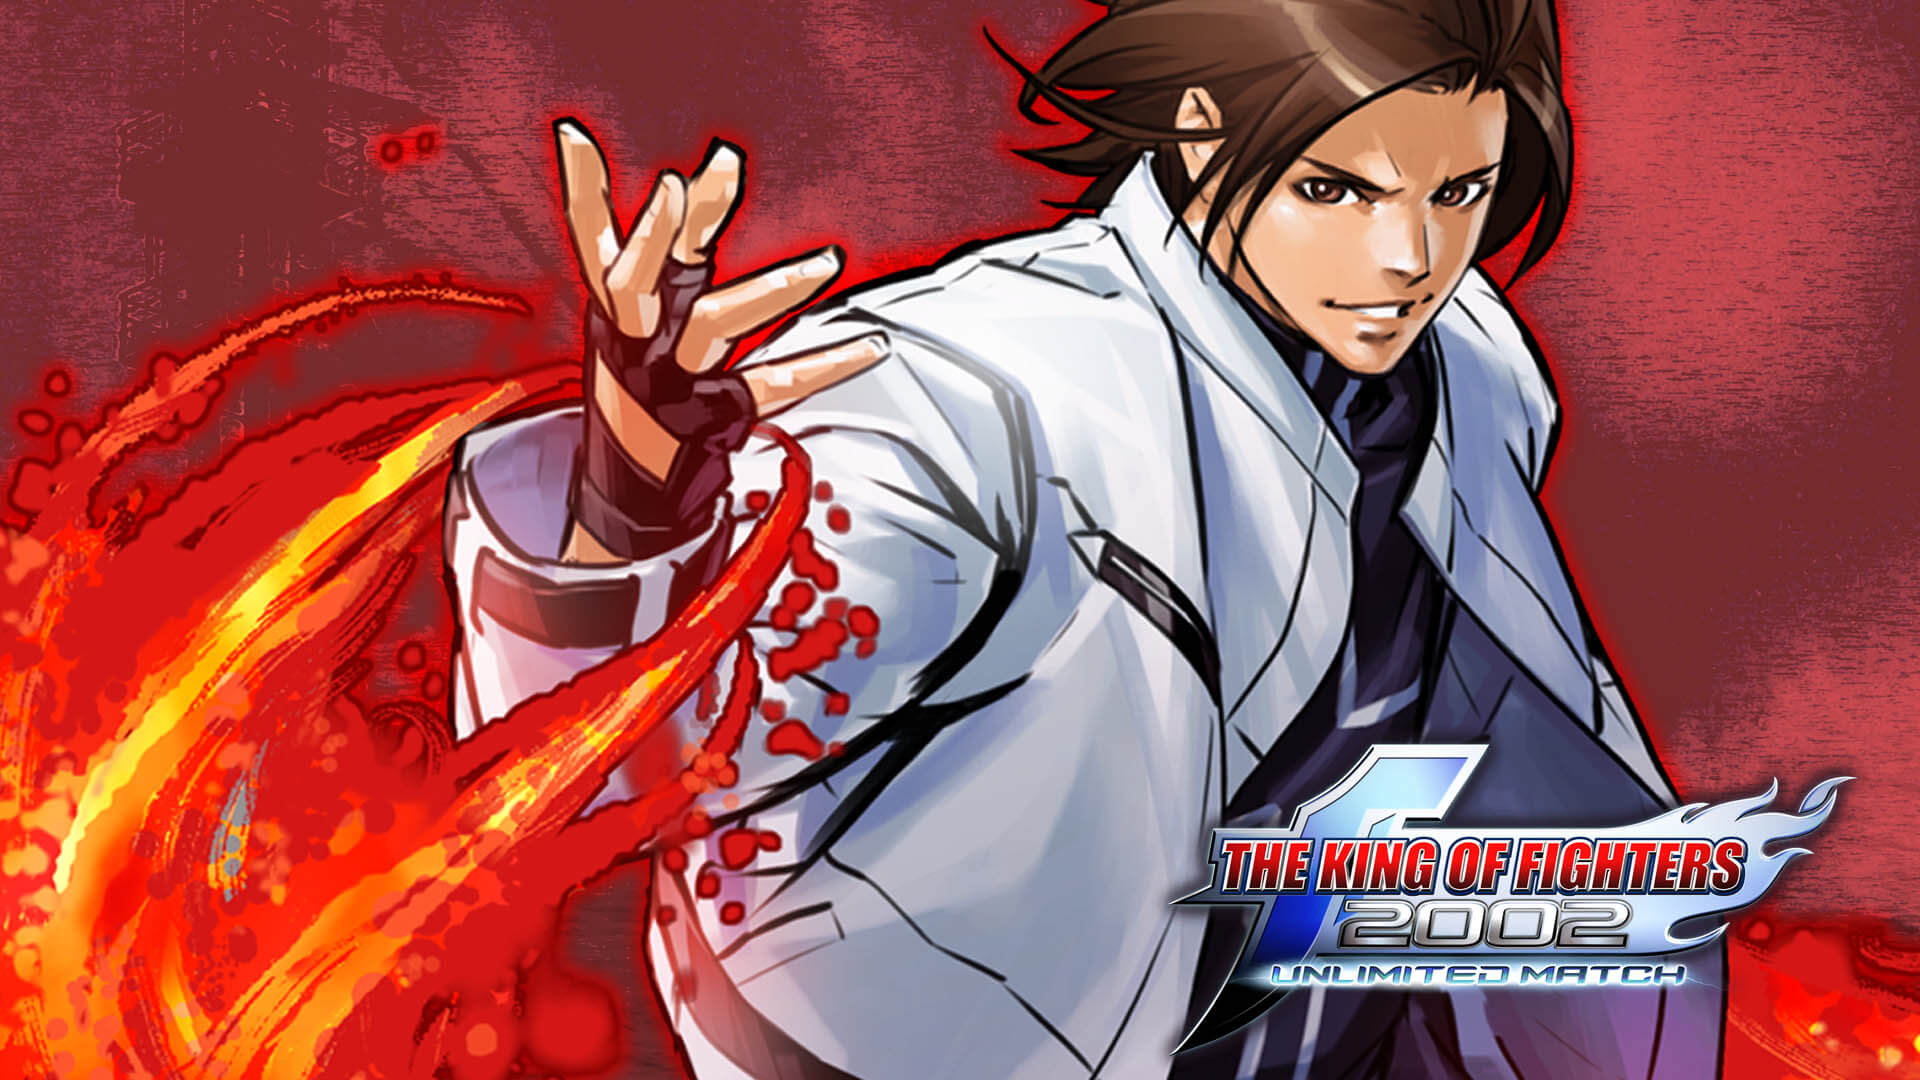 Download Kof2002 - The King Of Fighters 2002 Unlimited Match Play